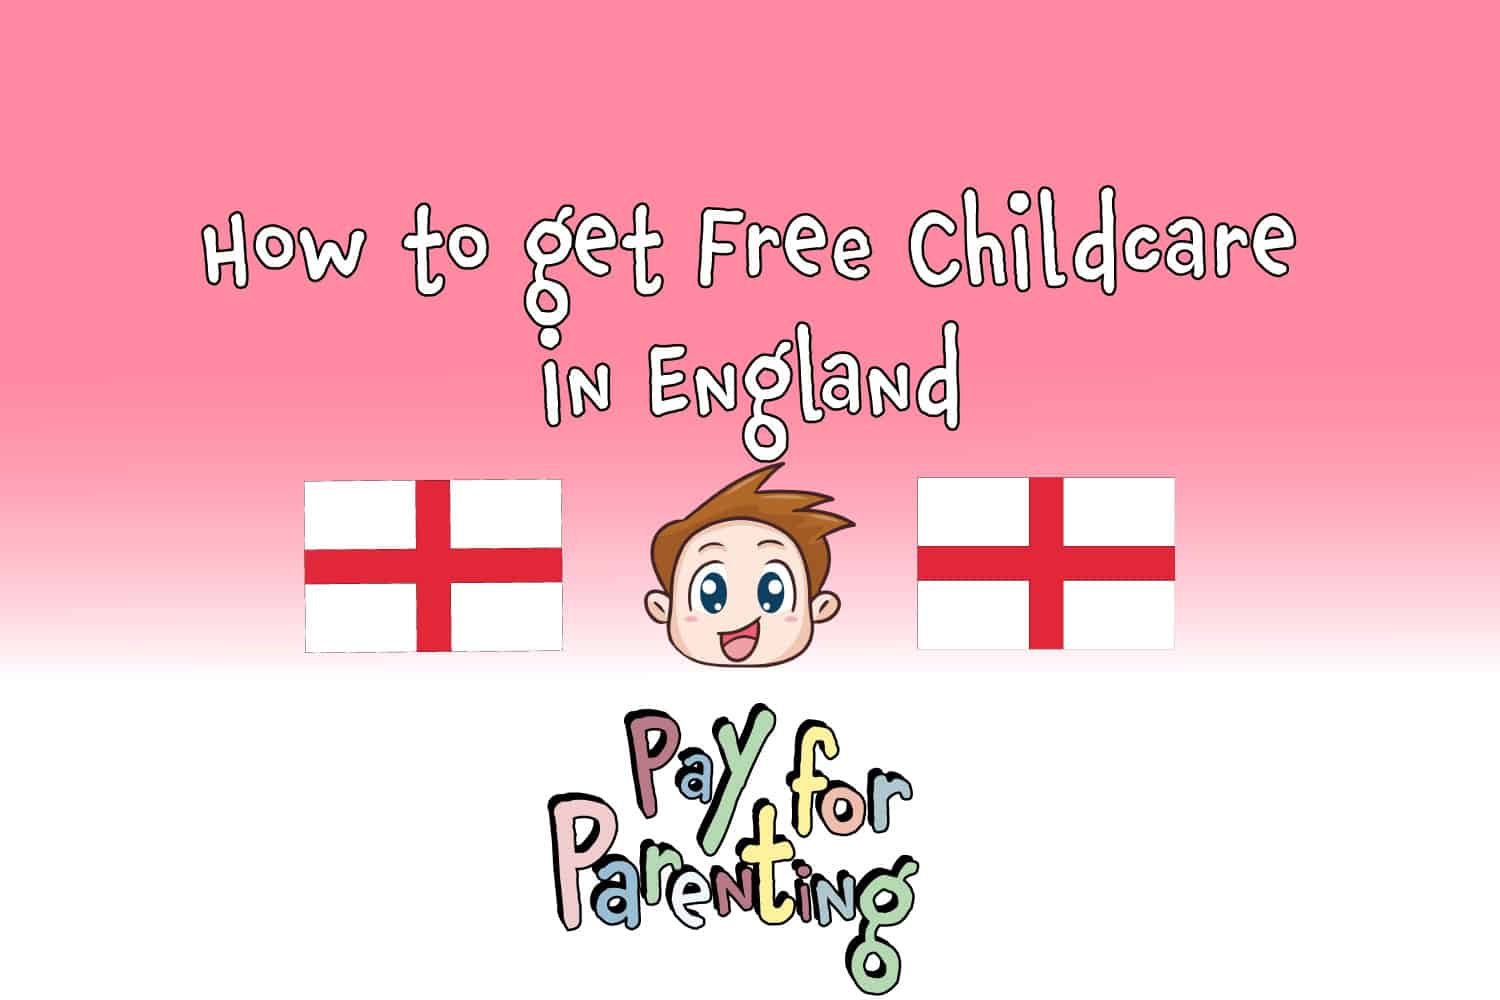 How To Get Free Childcare